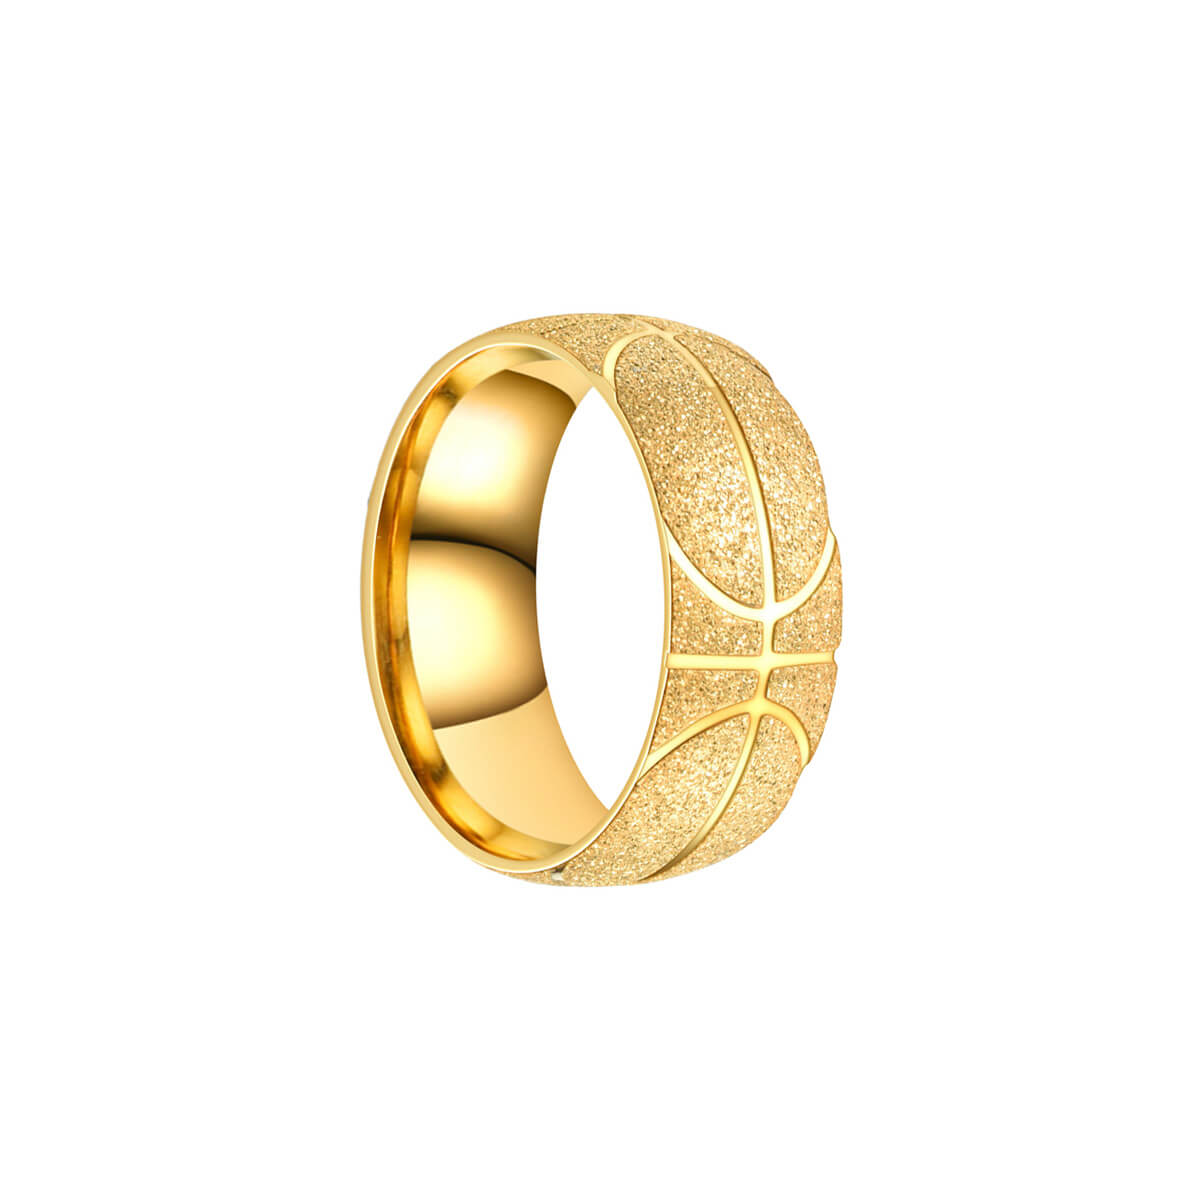 Sparkling gold plated basketball ring 8mm (Steel 316L)